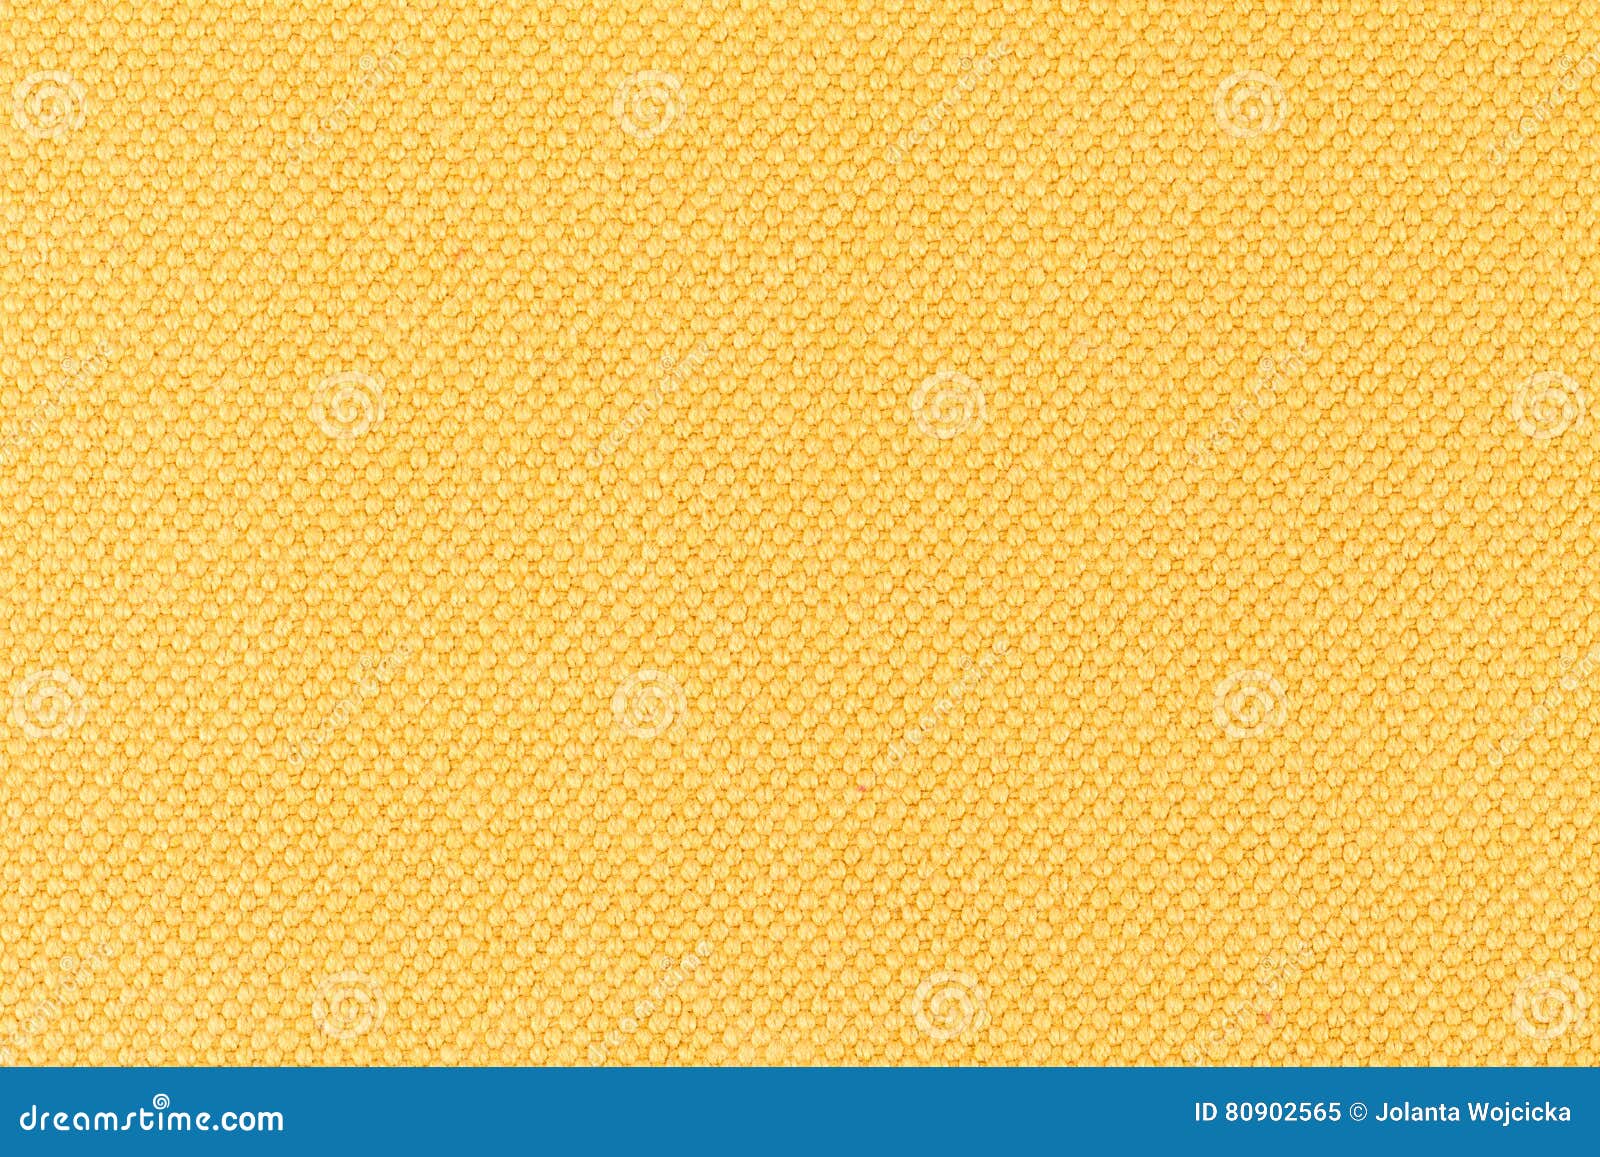 Background of Yellow Fabric, Texture of the Material, Close Up Stock ...